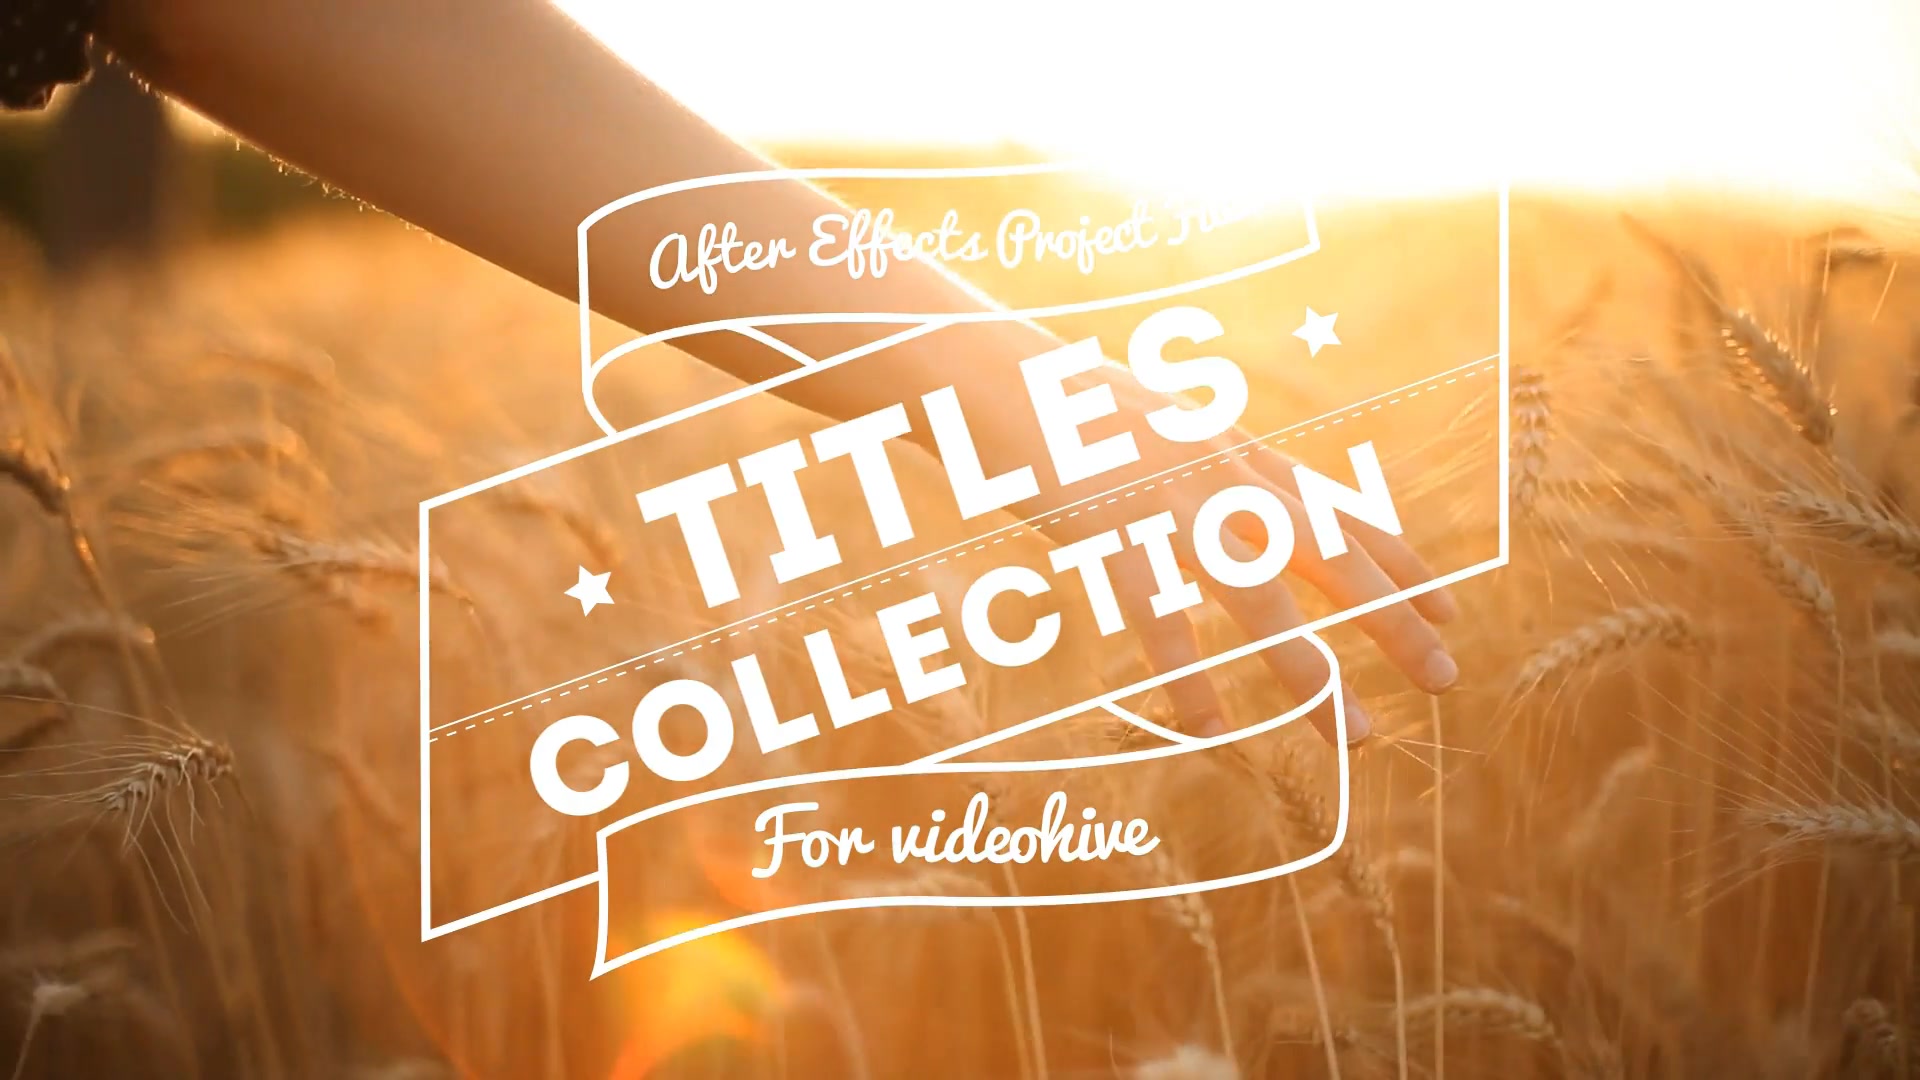 New Titles Collection - Download Videohive 6048398